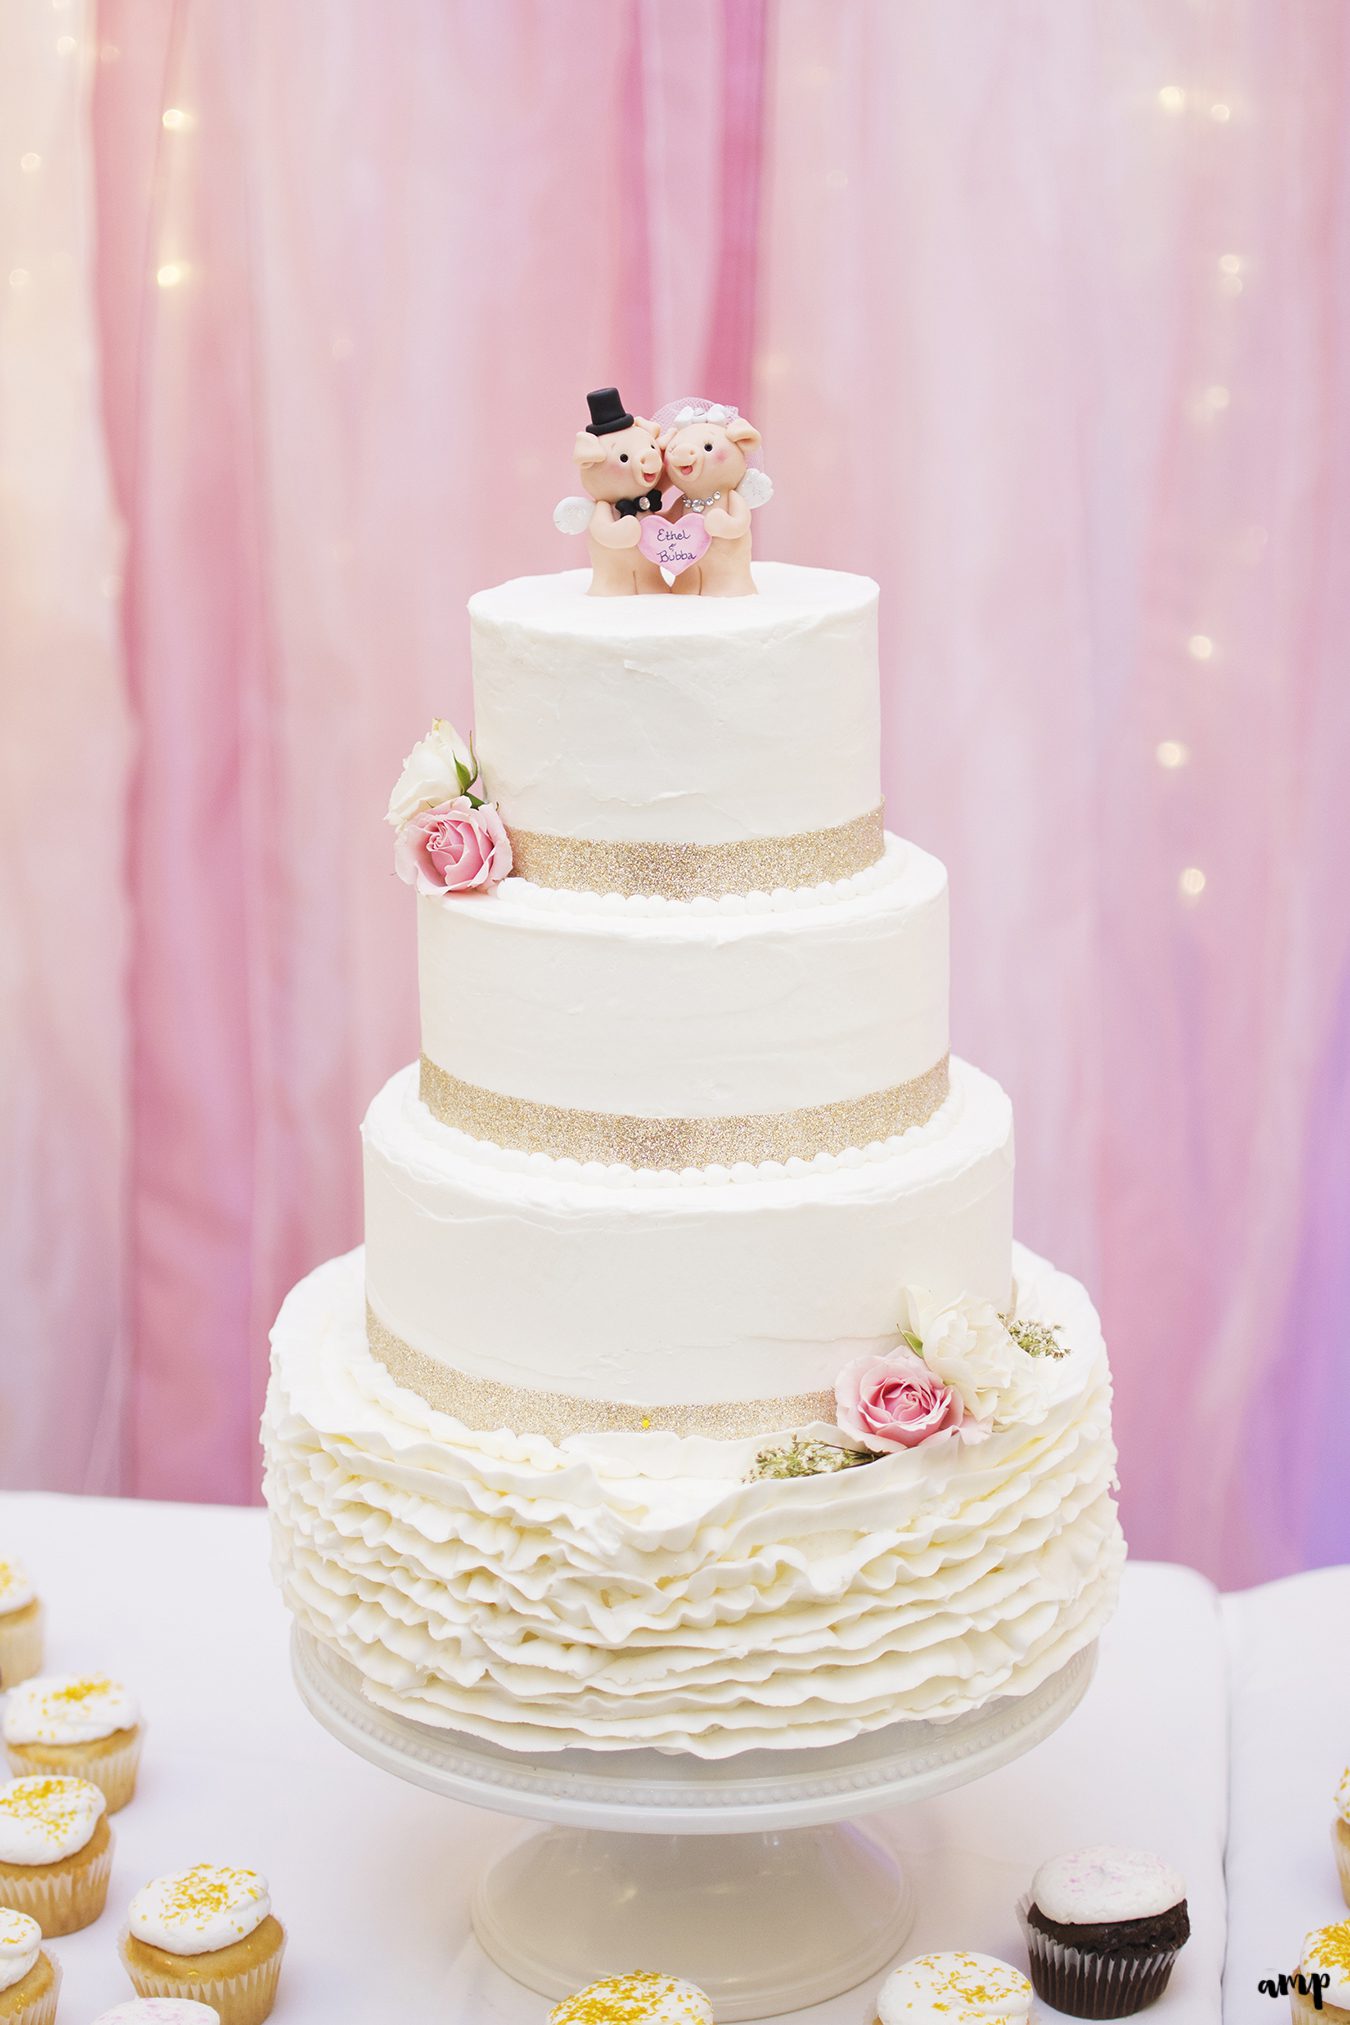 Wedding cake with pigs cake topper